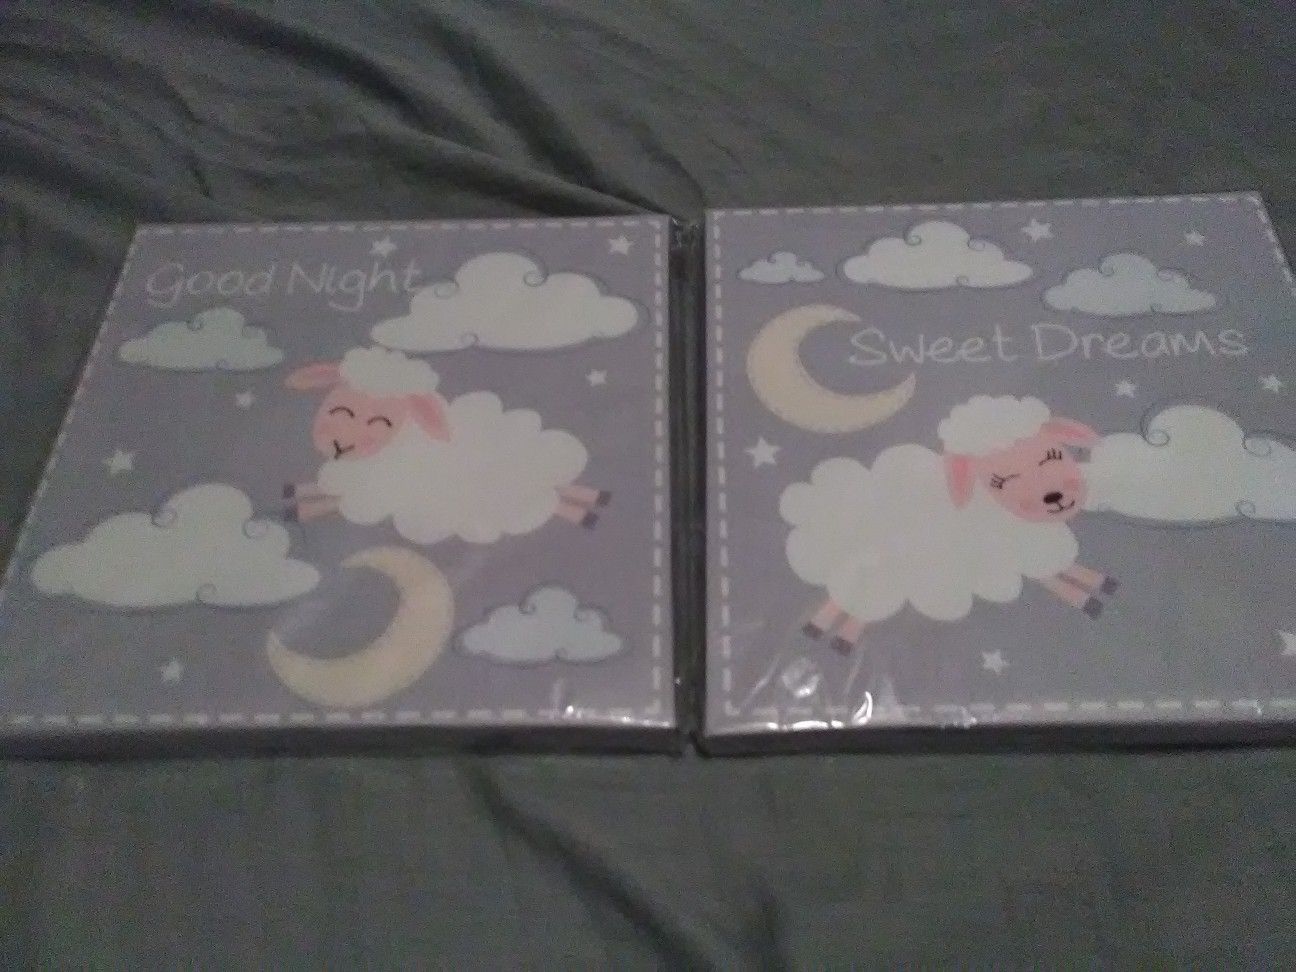 Baby's room decor $2 each or both for $3